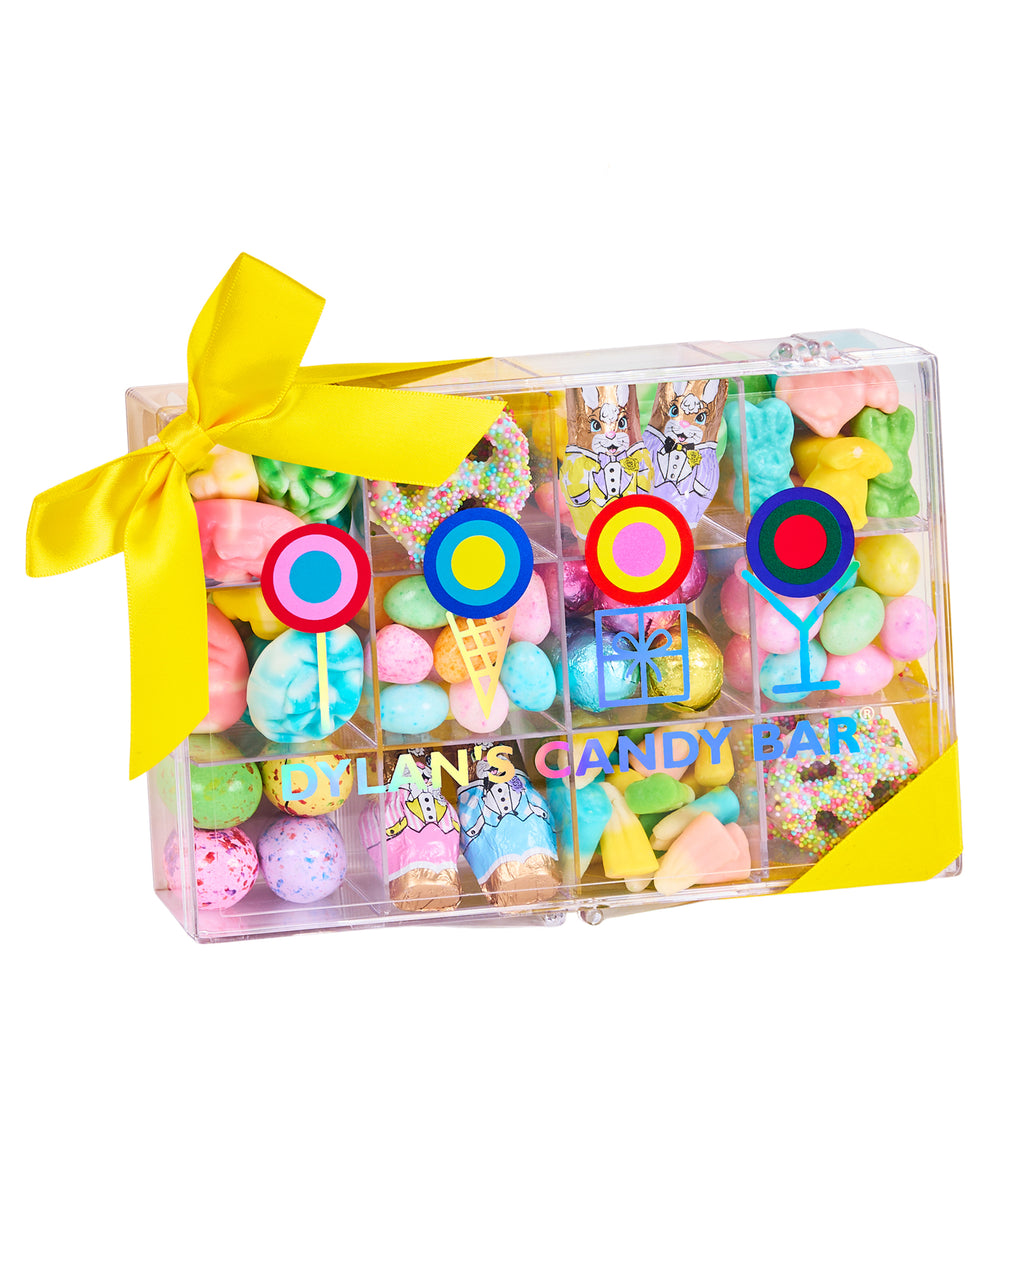 Sweetness of Spring Tackle Box - Dylan's Candy Bar